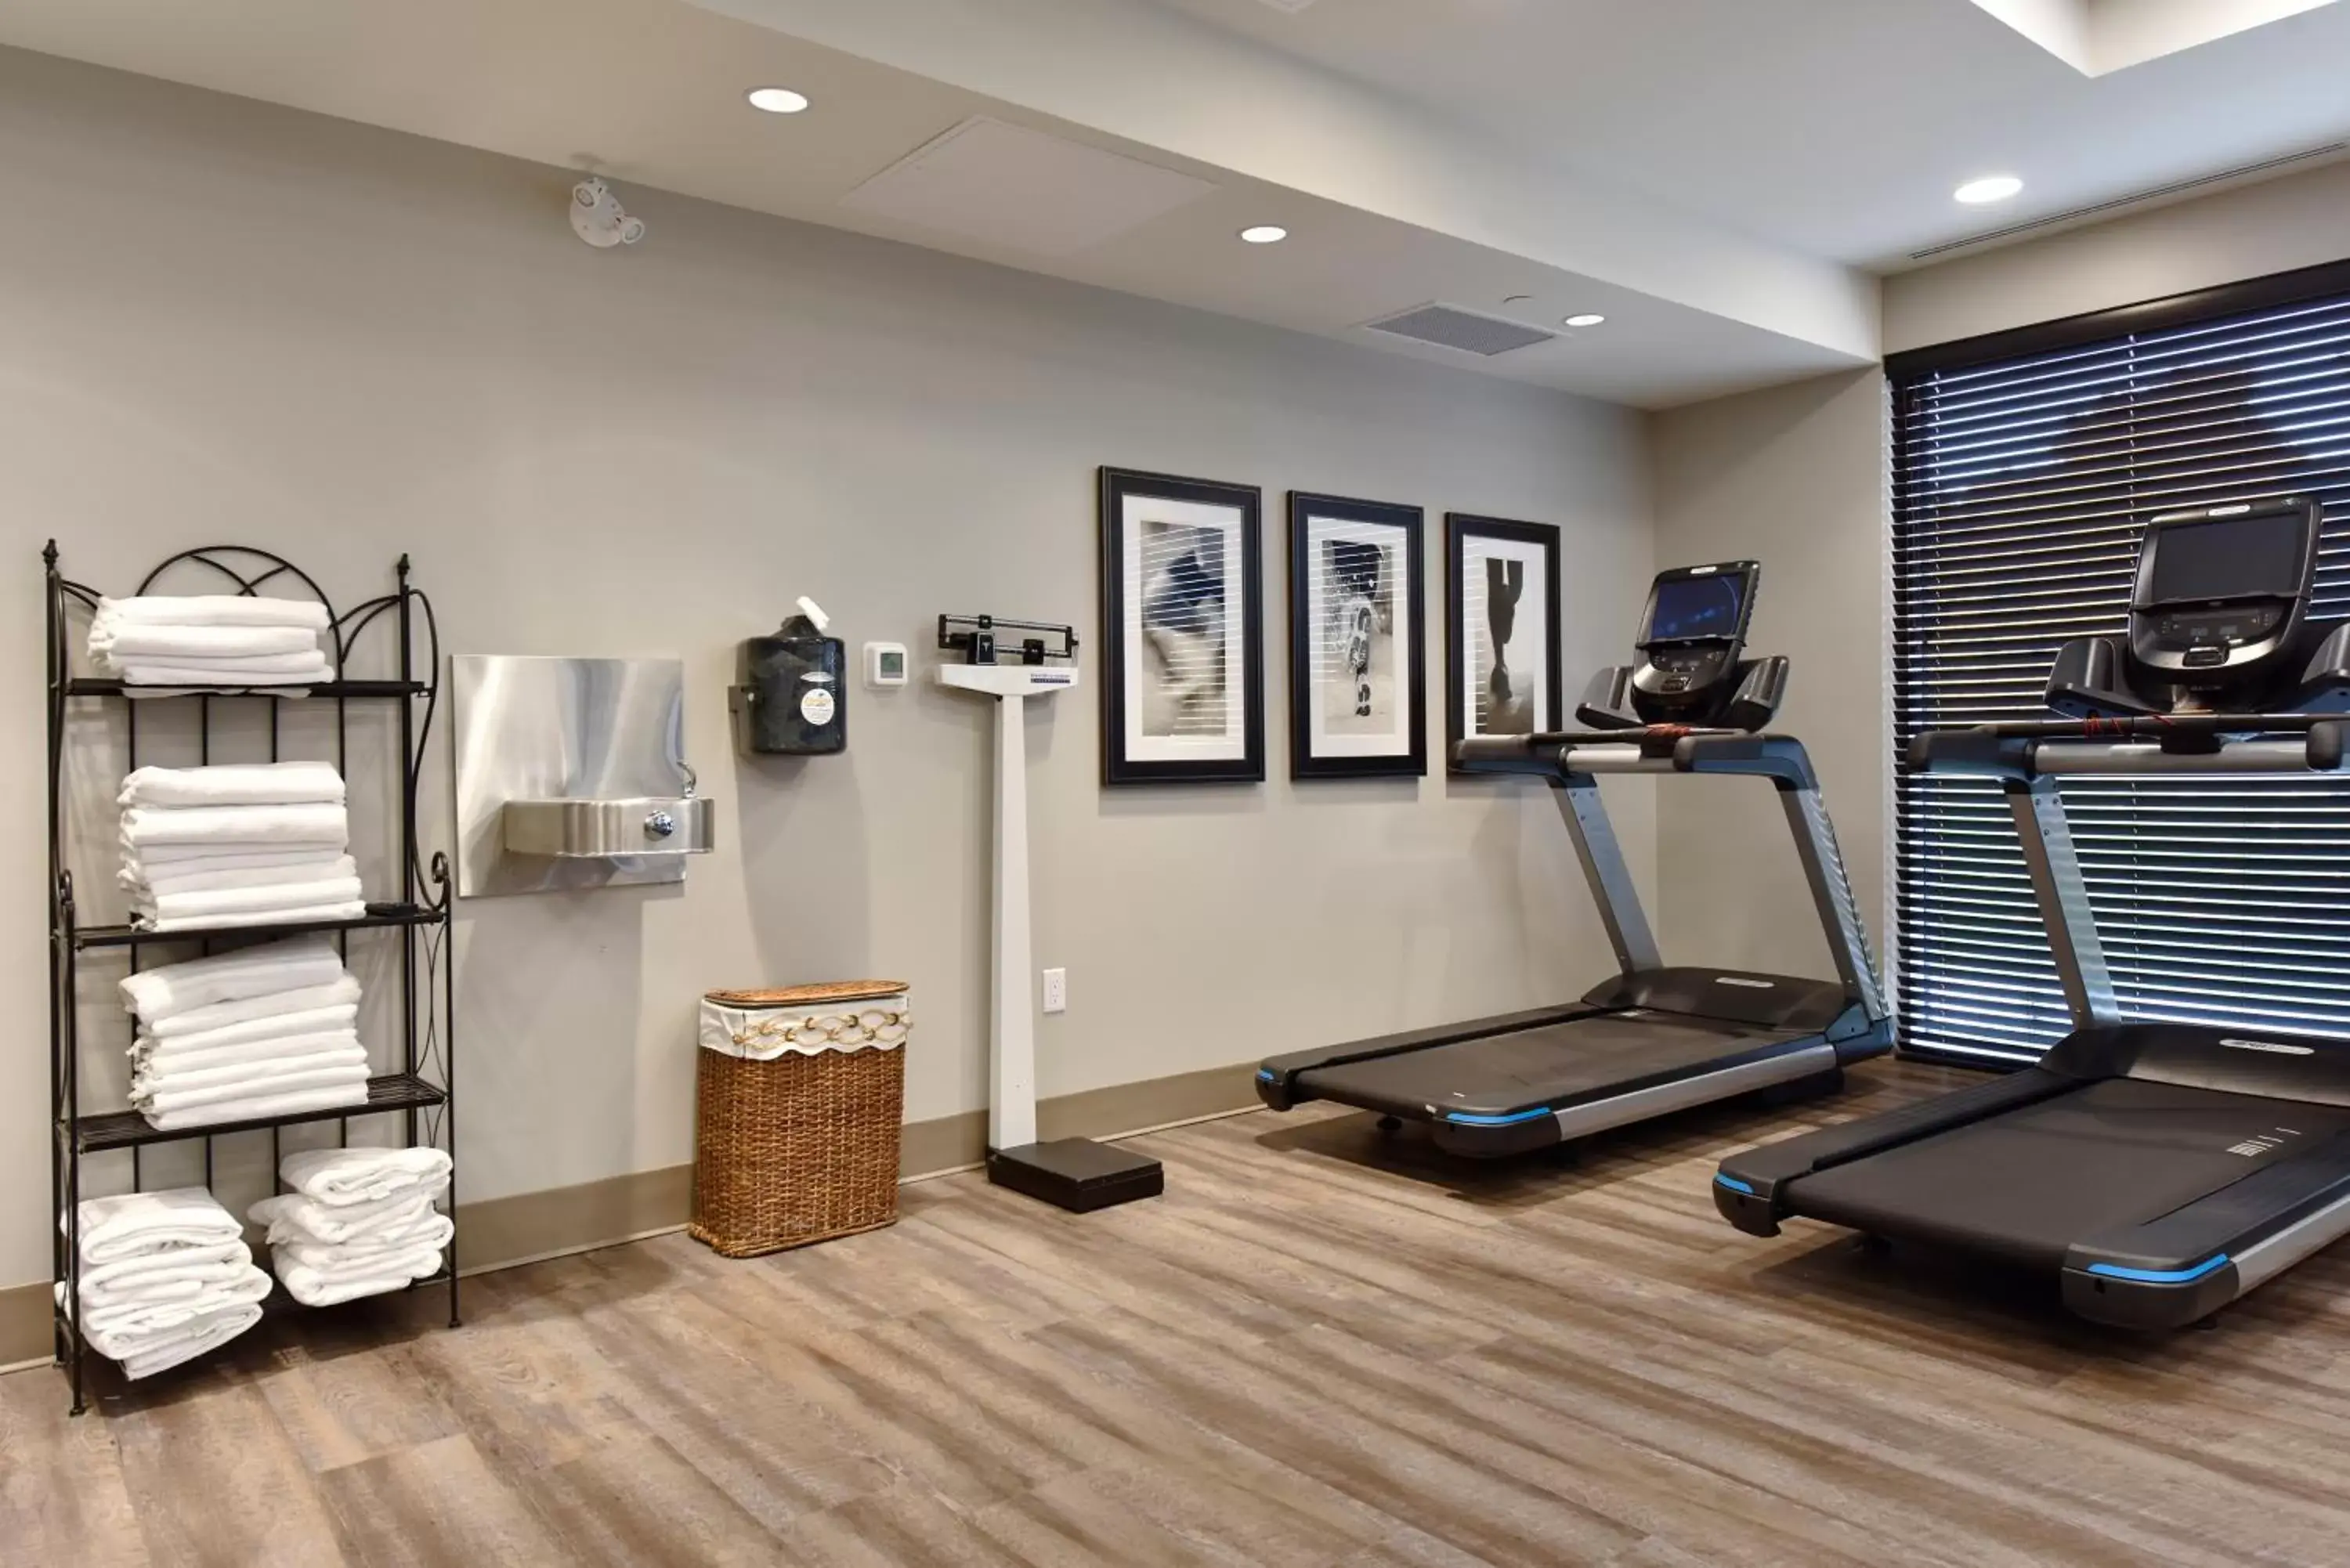 Fitness centre/facilities, Fitness Center/Facilities in Staybridge Suites - Waterloo - St. Jacobs Area